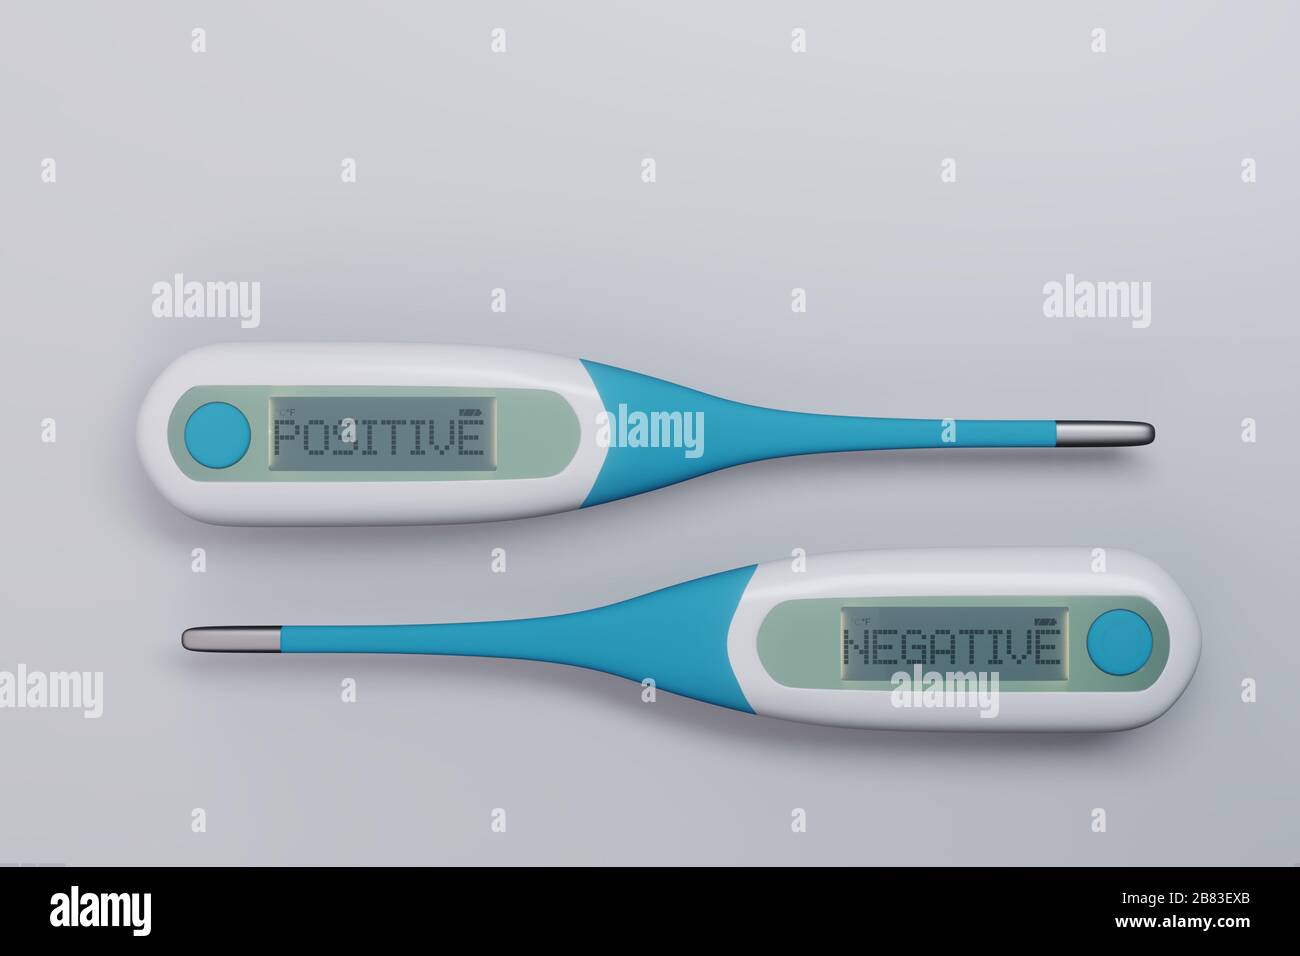 https://c8.alamy.com/comp/2B83EXB/digital-thermometers-reading-back-positive-and-negative-results-on-a-lcd-display-pictured-in-a-clean-and-sterile-lab-like-environment-2B83EXB.jpg